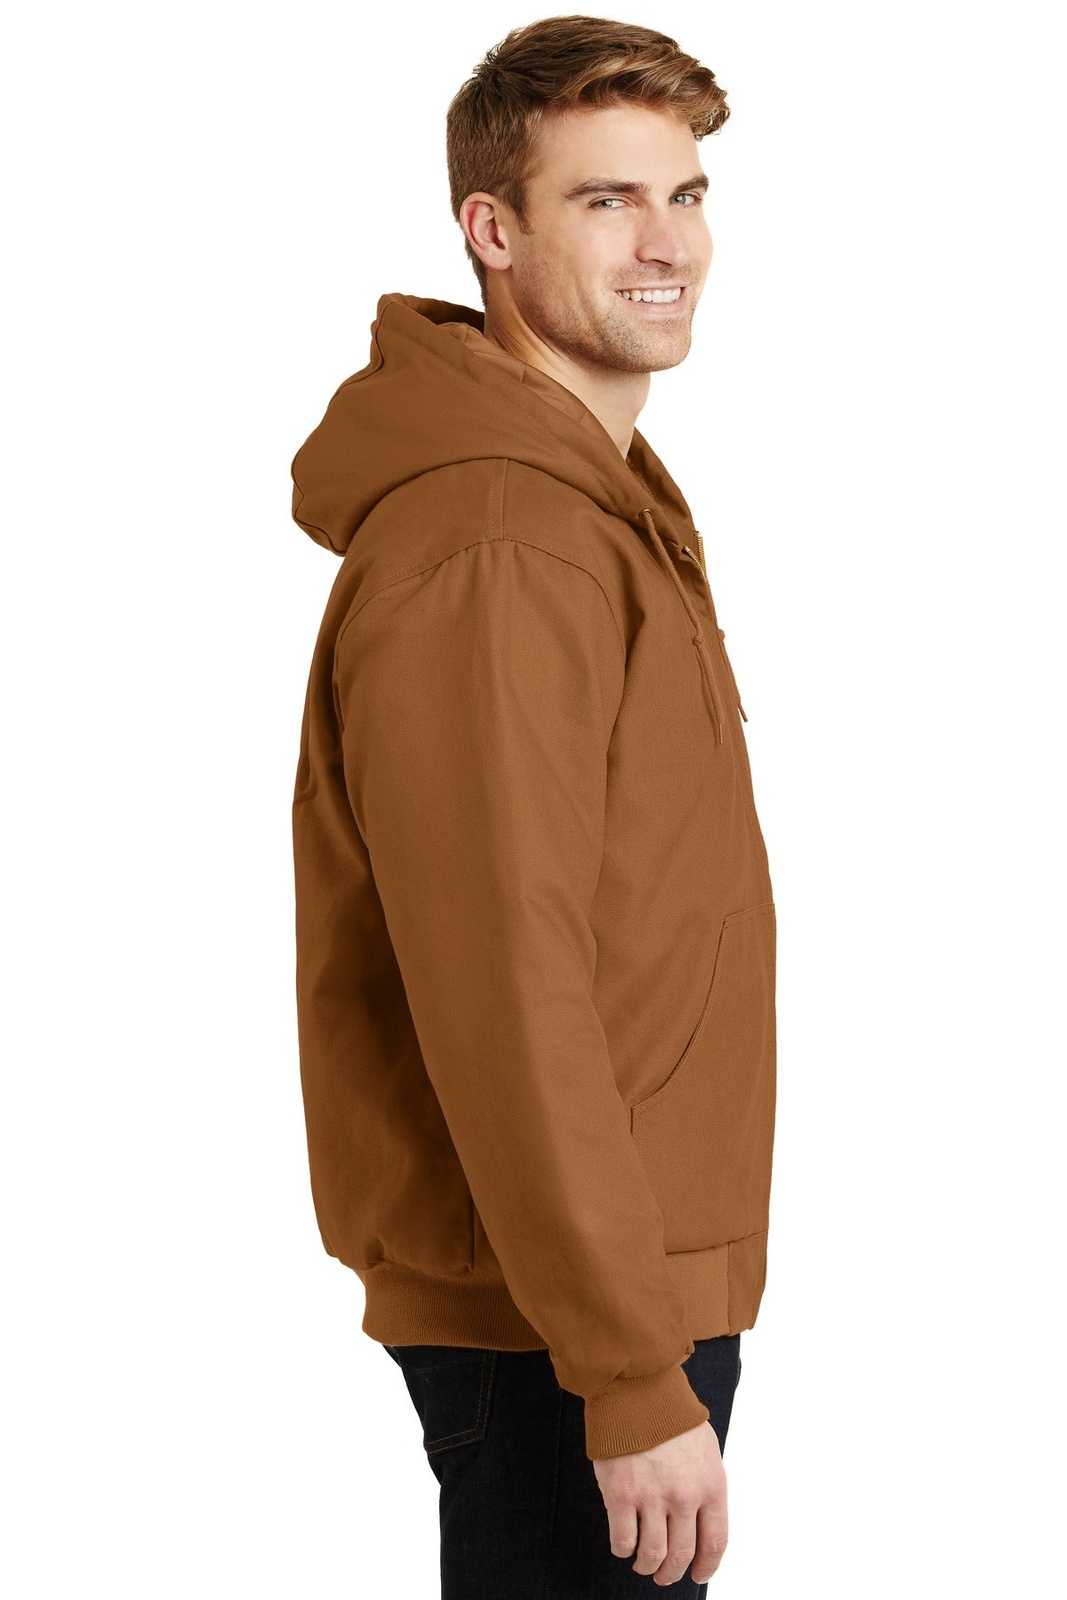 CornerStone J763H Duck Cloth Hooded Work Jacket - Duck Brown - HIT a Double - 3